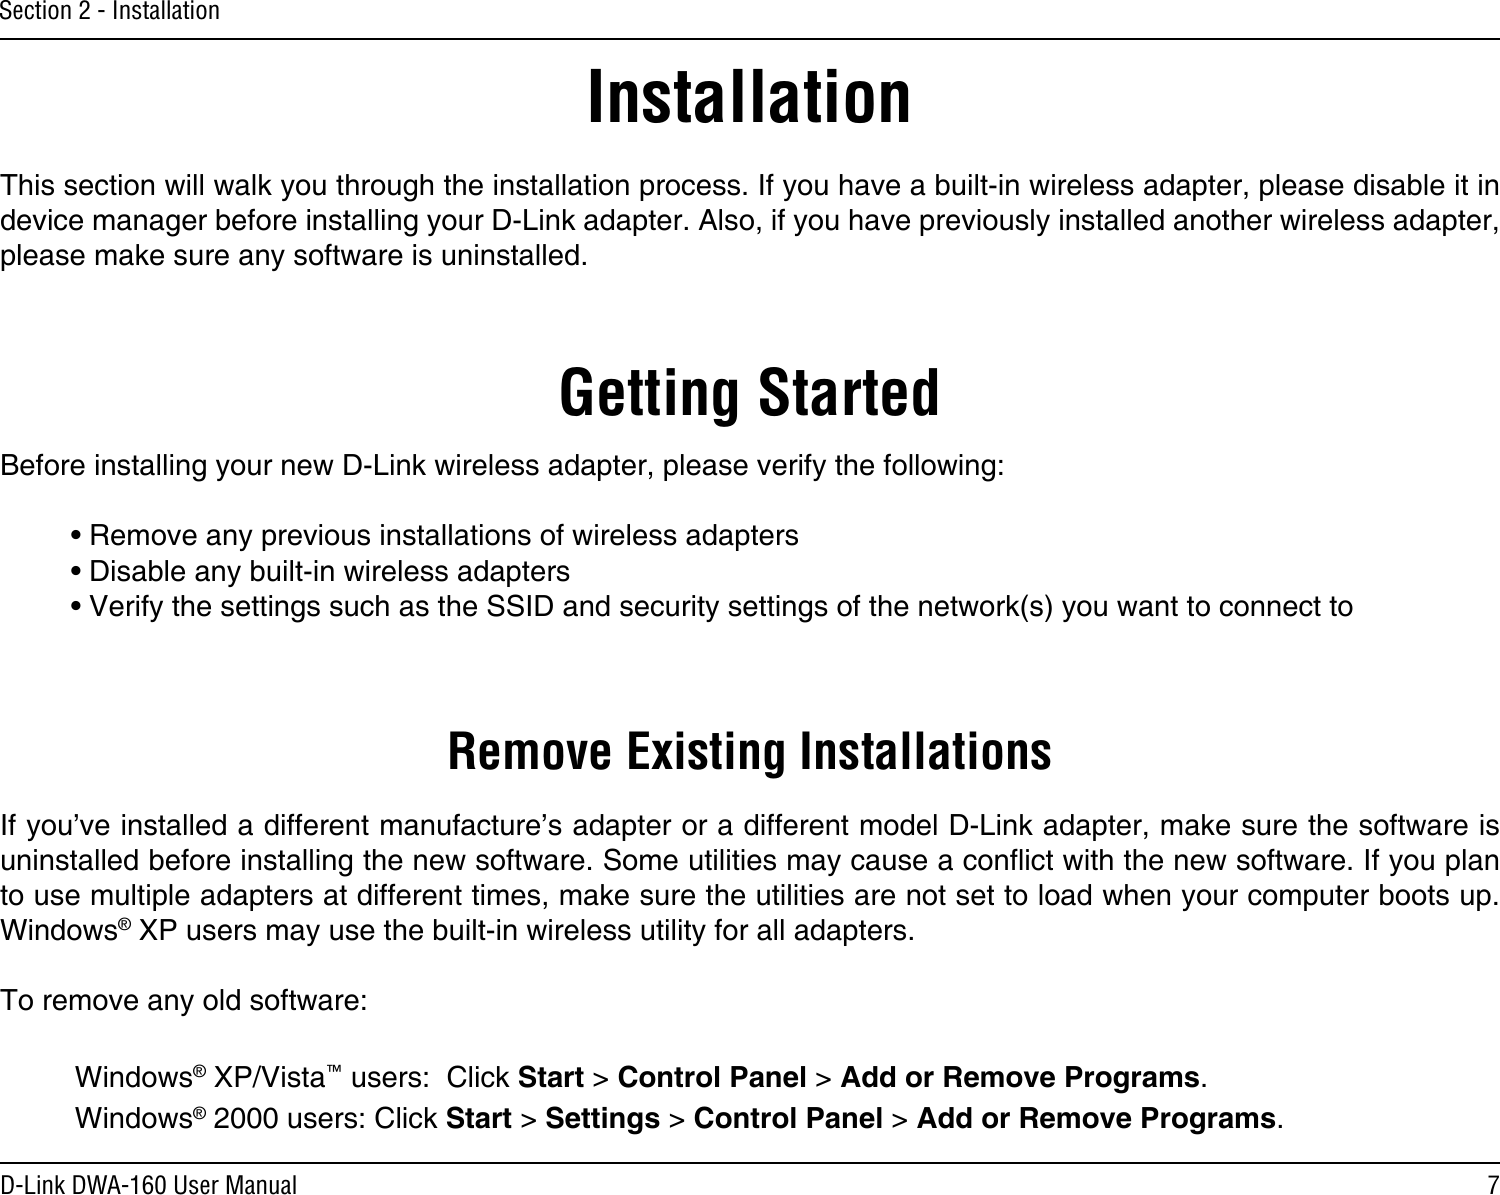 7D-Link DWA-160 User ManualSection 2 - InstallationGetting StartedInstallationThis section will walk you through the installation process. If you have a built-in wireless adapter, please disable it in device manager before installing your D-Link adapter. Also, if you have previously installed another wireless adapter, please make sure any software is uninstalled.Before installing your new D-Link wireless adapter, please verify the following:• Remove any previous installations of wireless adapters• Disable any built-in wireless adapters • Verify the settings such as the SSID and security settings of the network(s) you want to connect toRemove Existing InstallationsIf you’ve installed a different manufacture’s adapter or a different model D-Link adapter, make sure the software is uninstalled before installing the new software. Some utilities may cause a conict with the new software. If you plan to use multiple adapters at different times, make sure the utilities are not set to load when your computer boots up. Windows® XP users may use the built-in wireless utility for all adapters.To remove any old software:  Windows® XP/Vista™ users:  Click Start &gt; Control Panel &gt; Add or Remove Programs.   Windows® 2000 users: Click Start &gt; Settings &gt; Control Panel &gt; Add or Remove Programs.